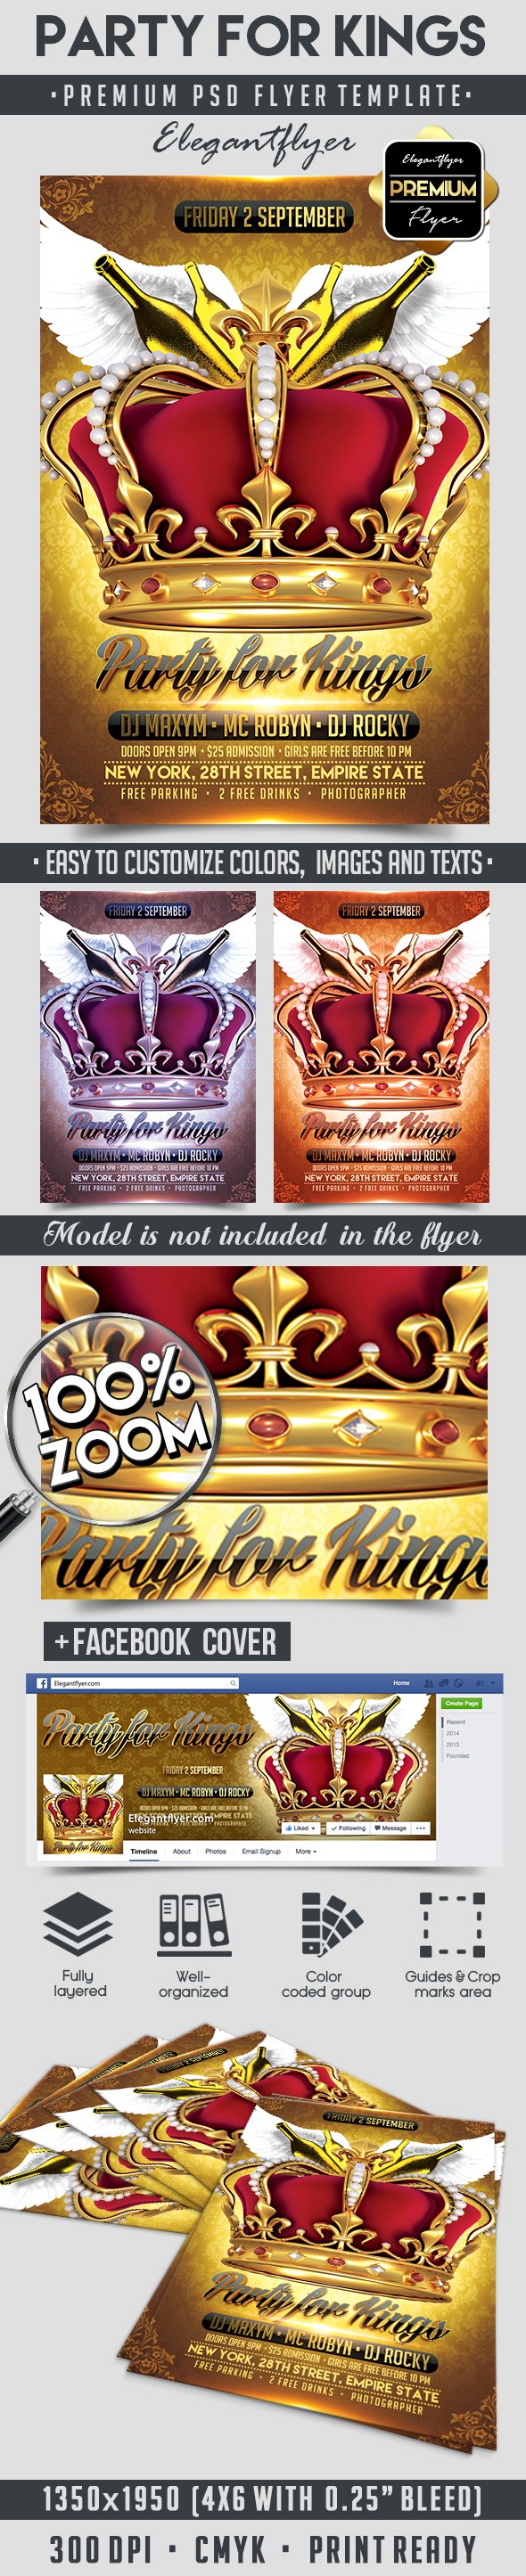 Party for Kings by ElegantFlyer